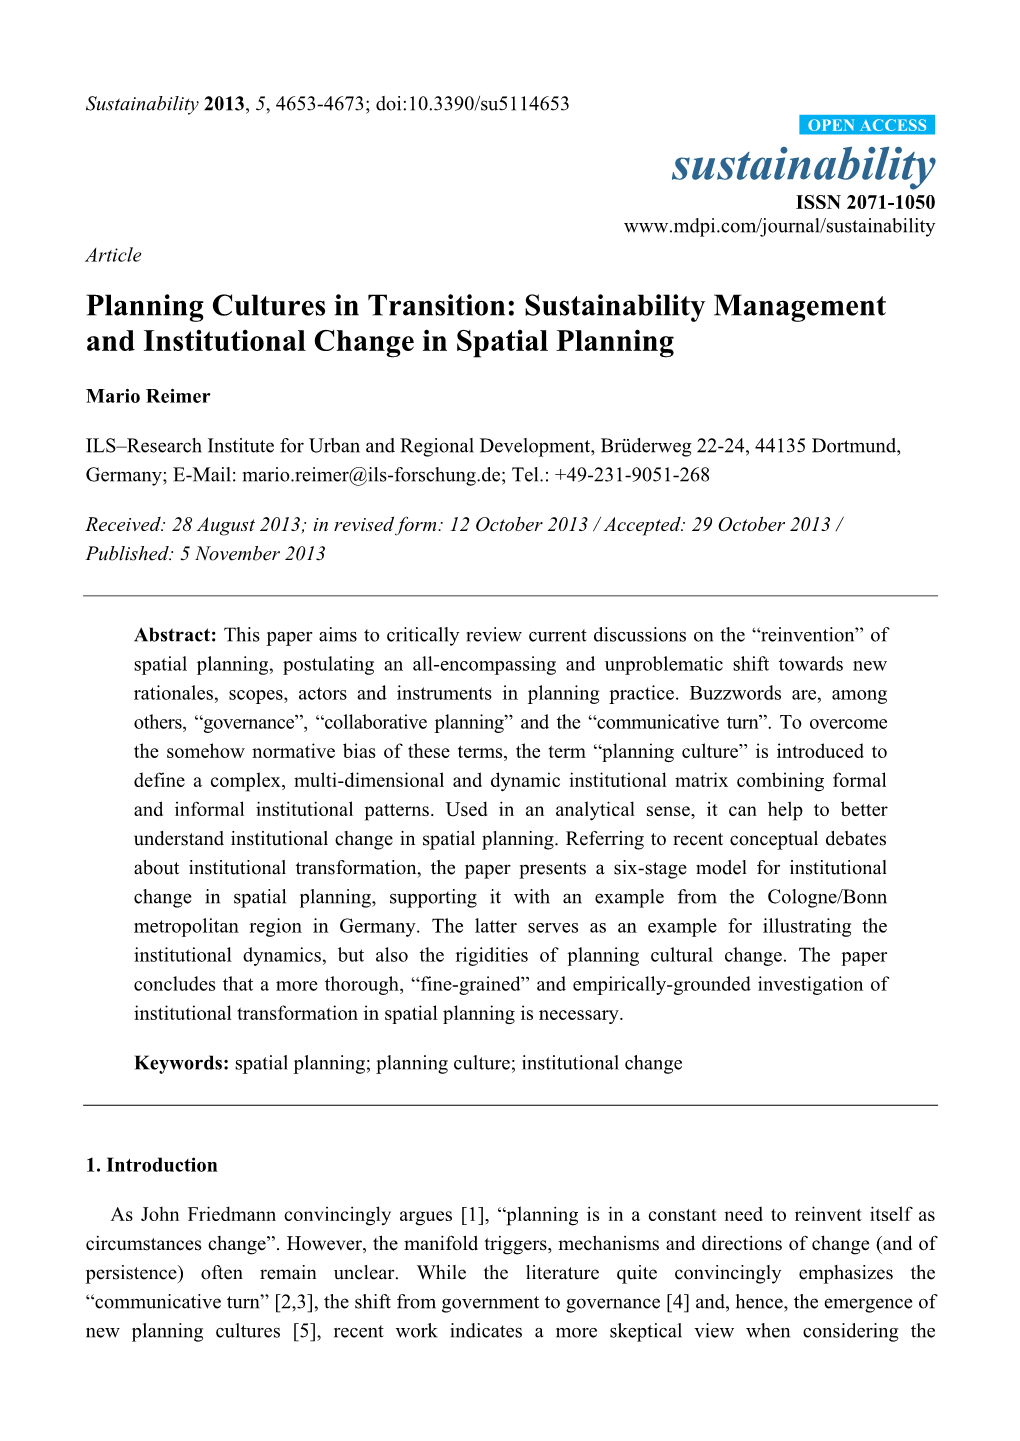 Planning Cultures in Transition: Sustainability Management and Institutional Change in Spatial Planning